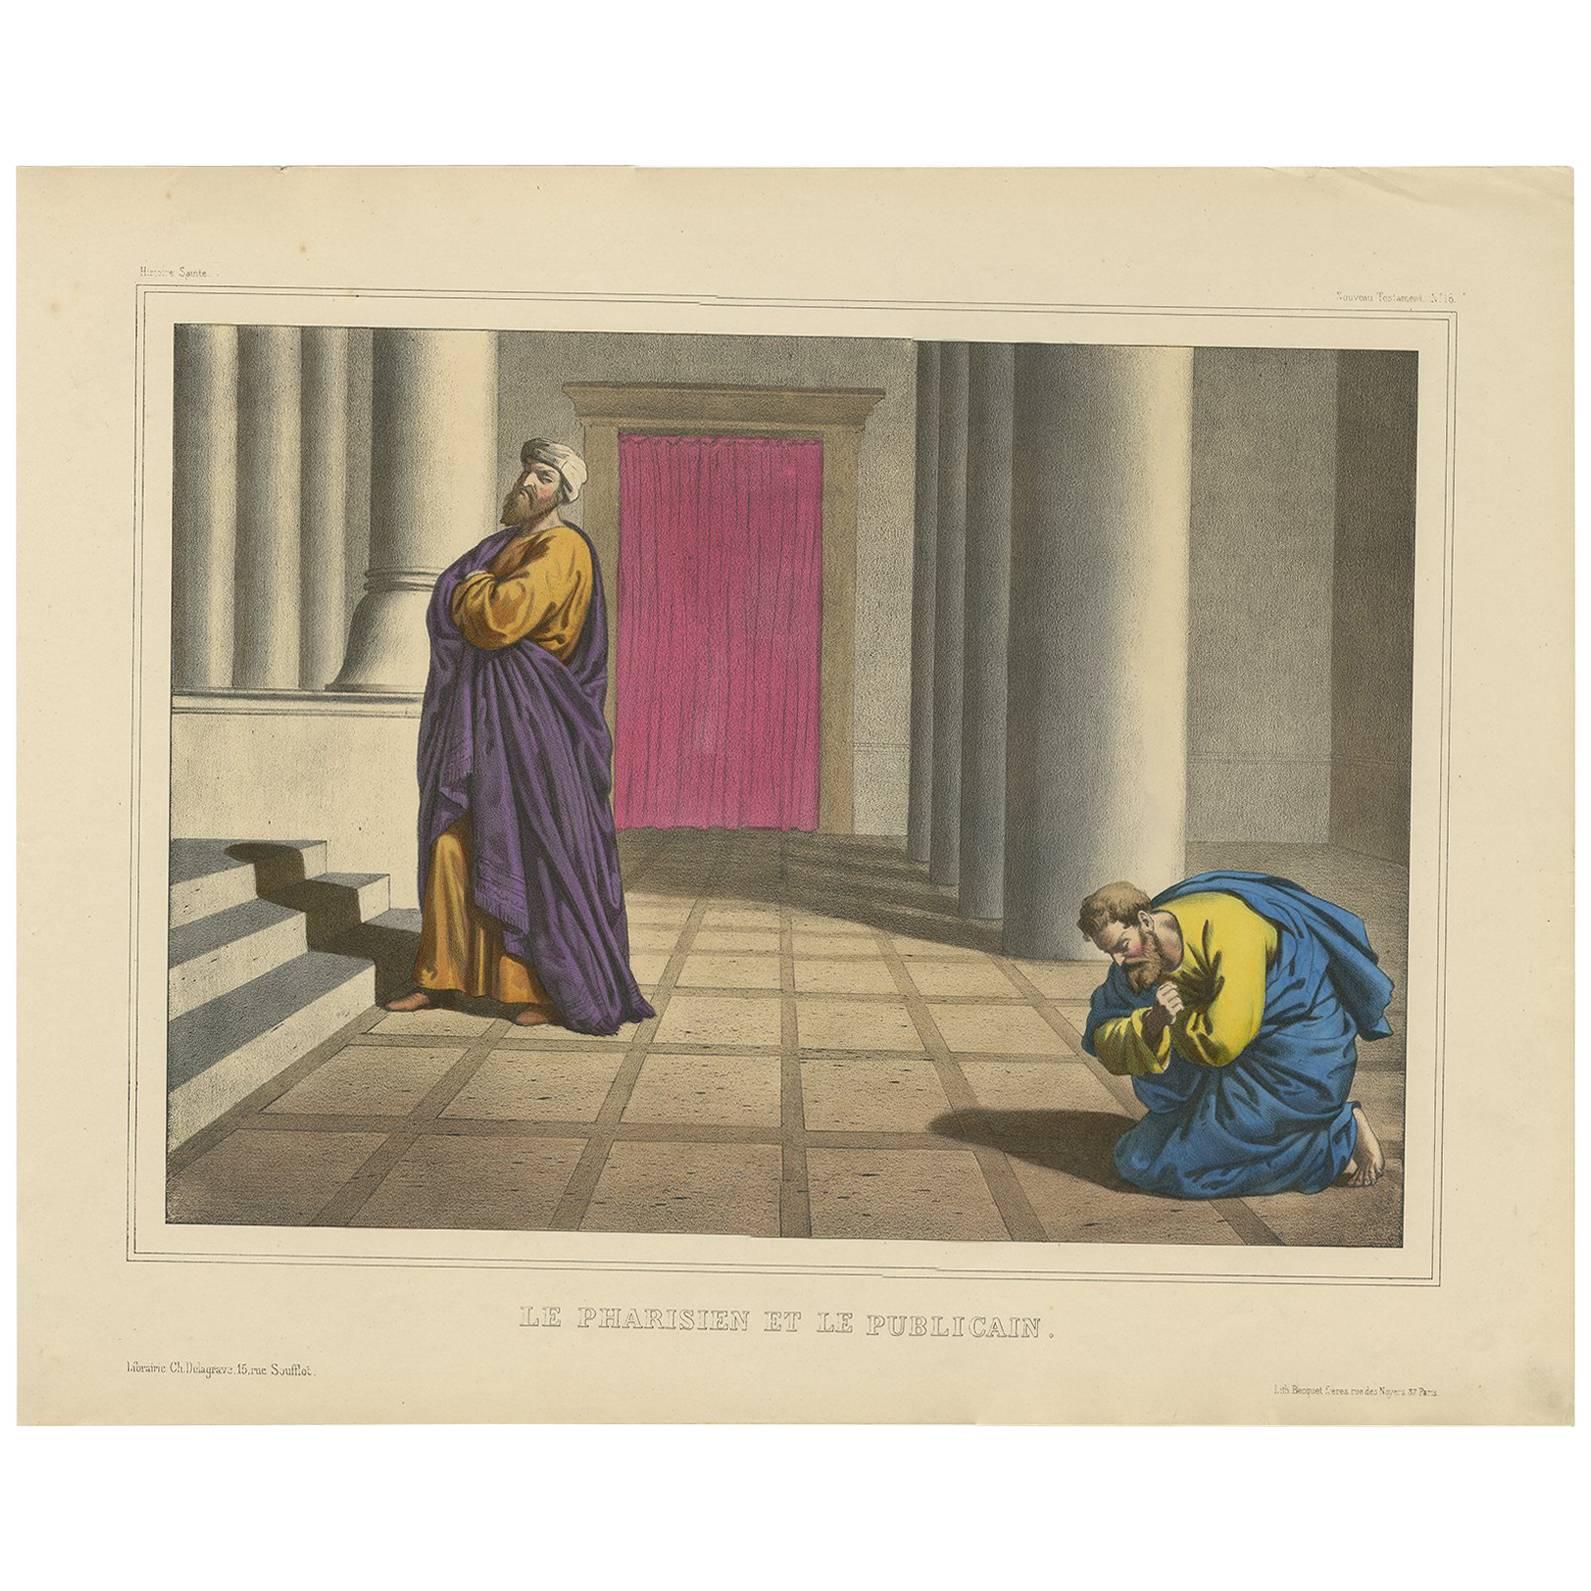 Antique Religious Print 'No. 16' The Pharisee and the Publican, circa 1840